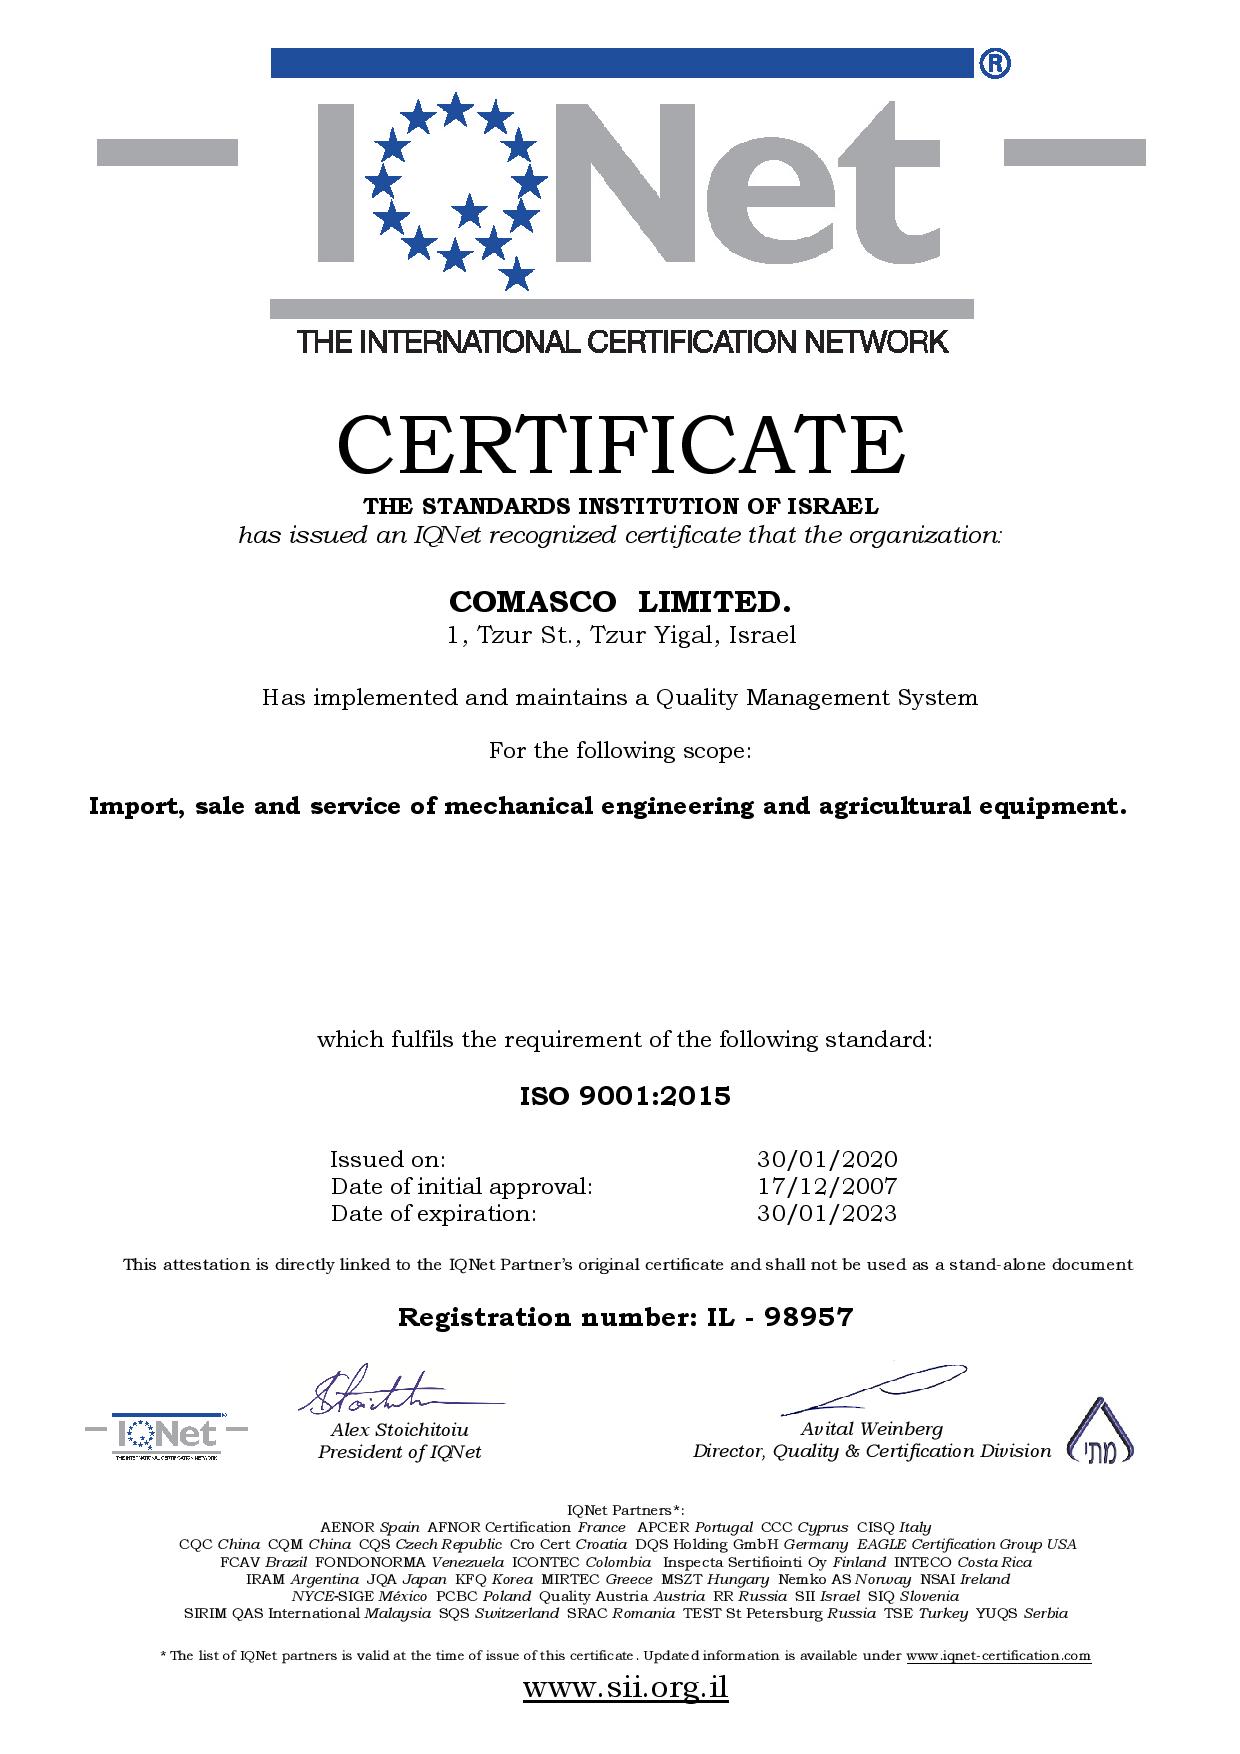 ISO 9001 Quality Management System certification by IQNET